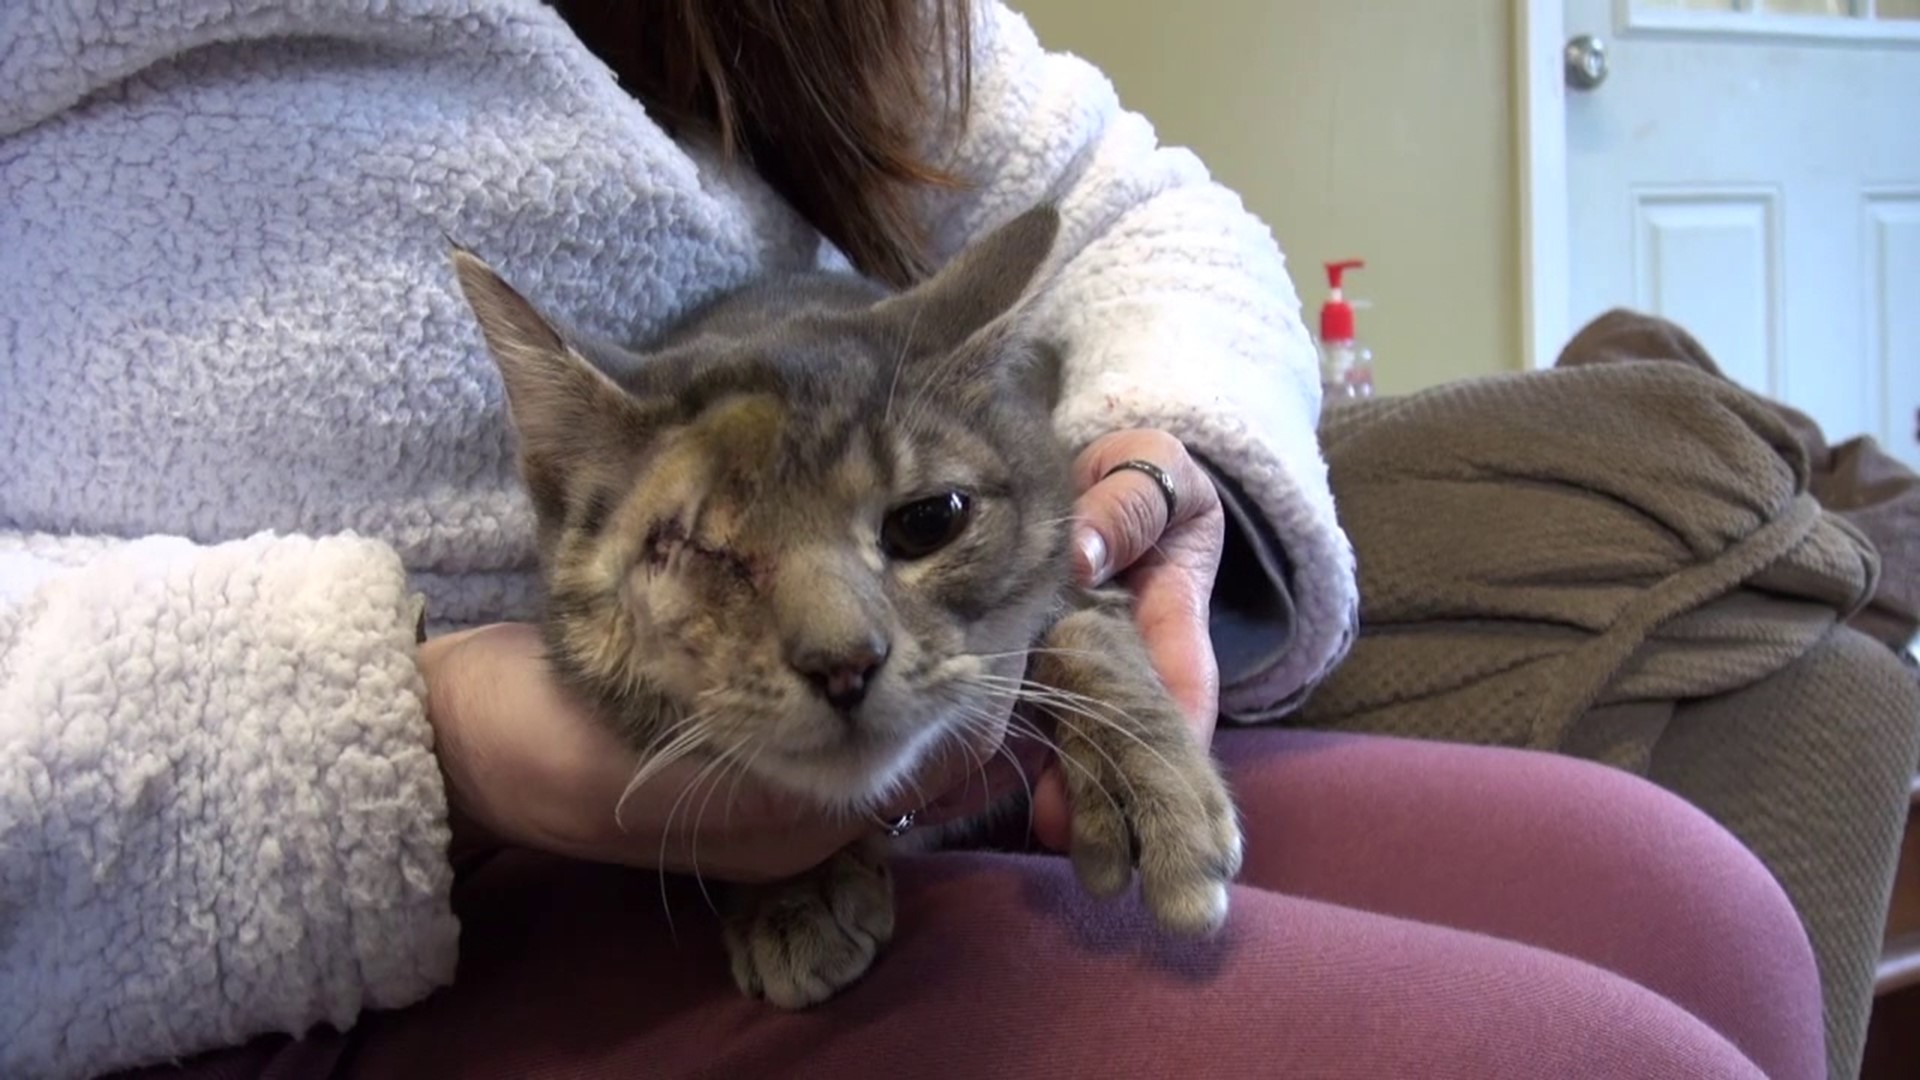 In this week's 16 To The Rescue, we meet Lefty, the sweetest cat who has had a rough go at it in his short life.